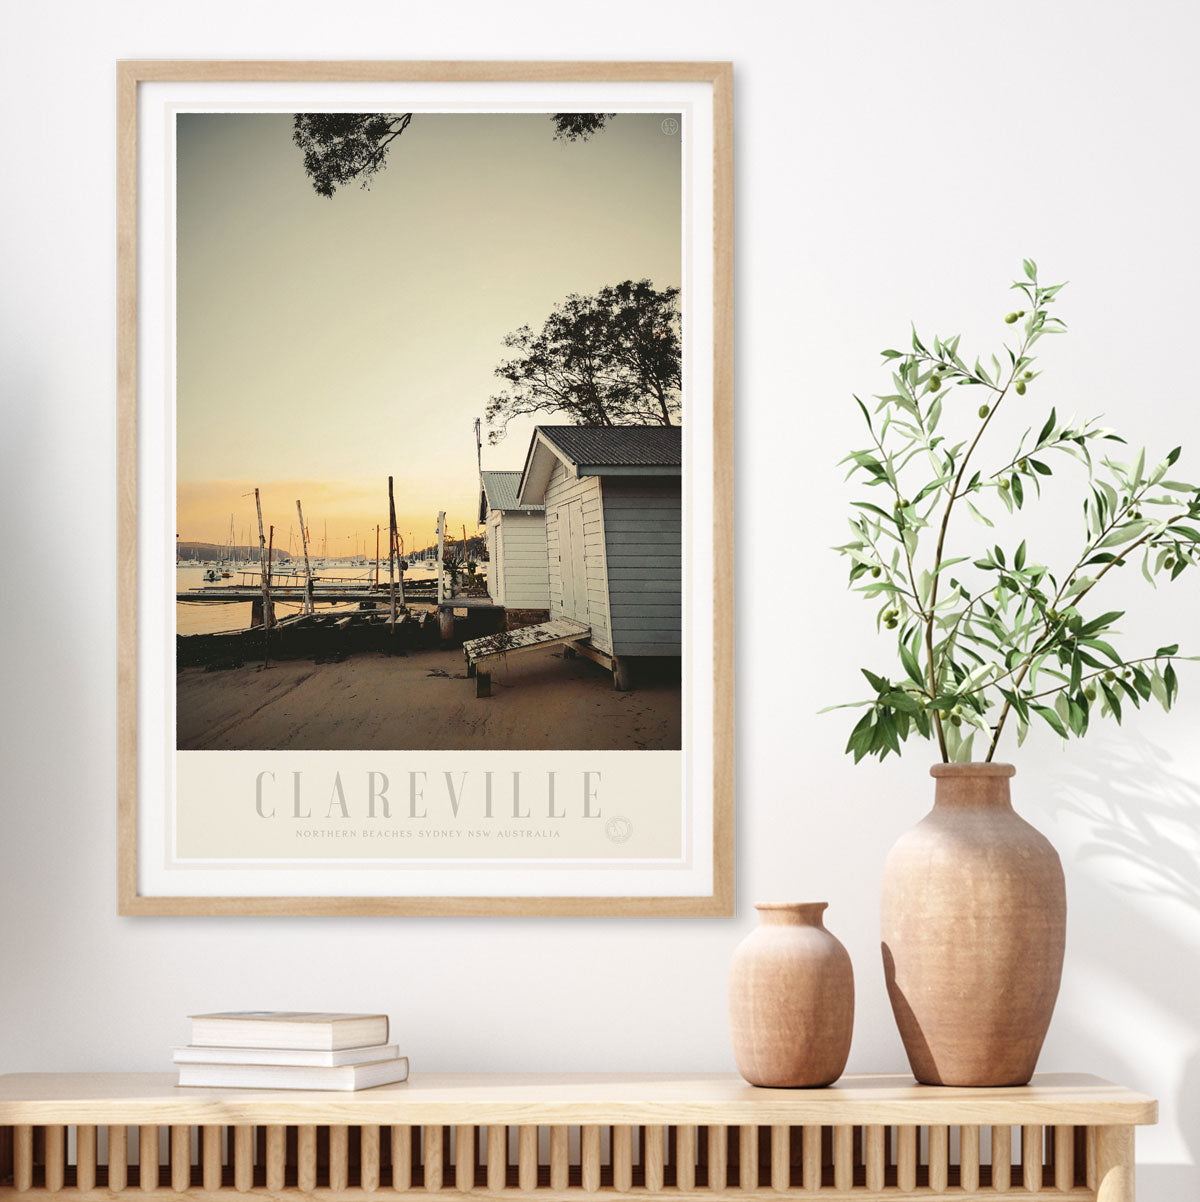 Clareville Pittwater Sydney, vintage retro print from Places We Luv